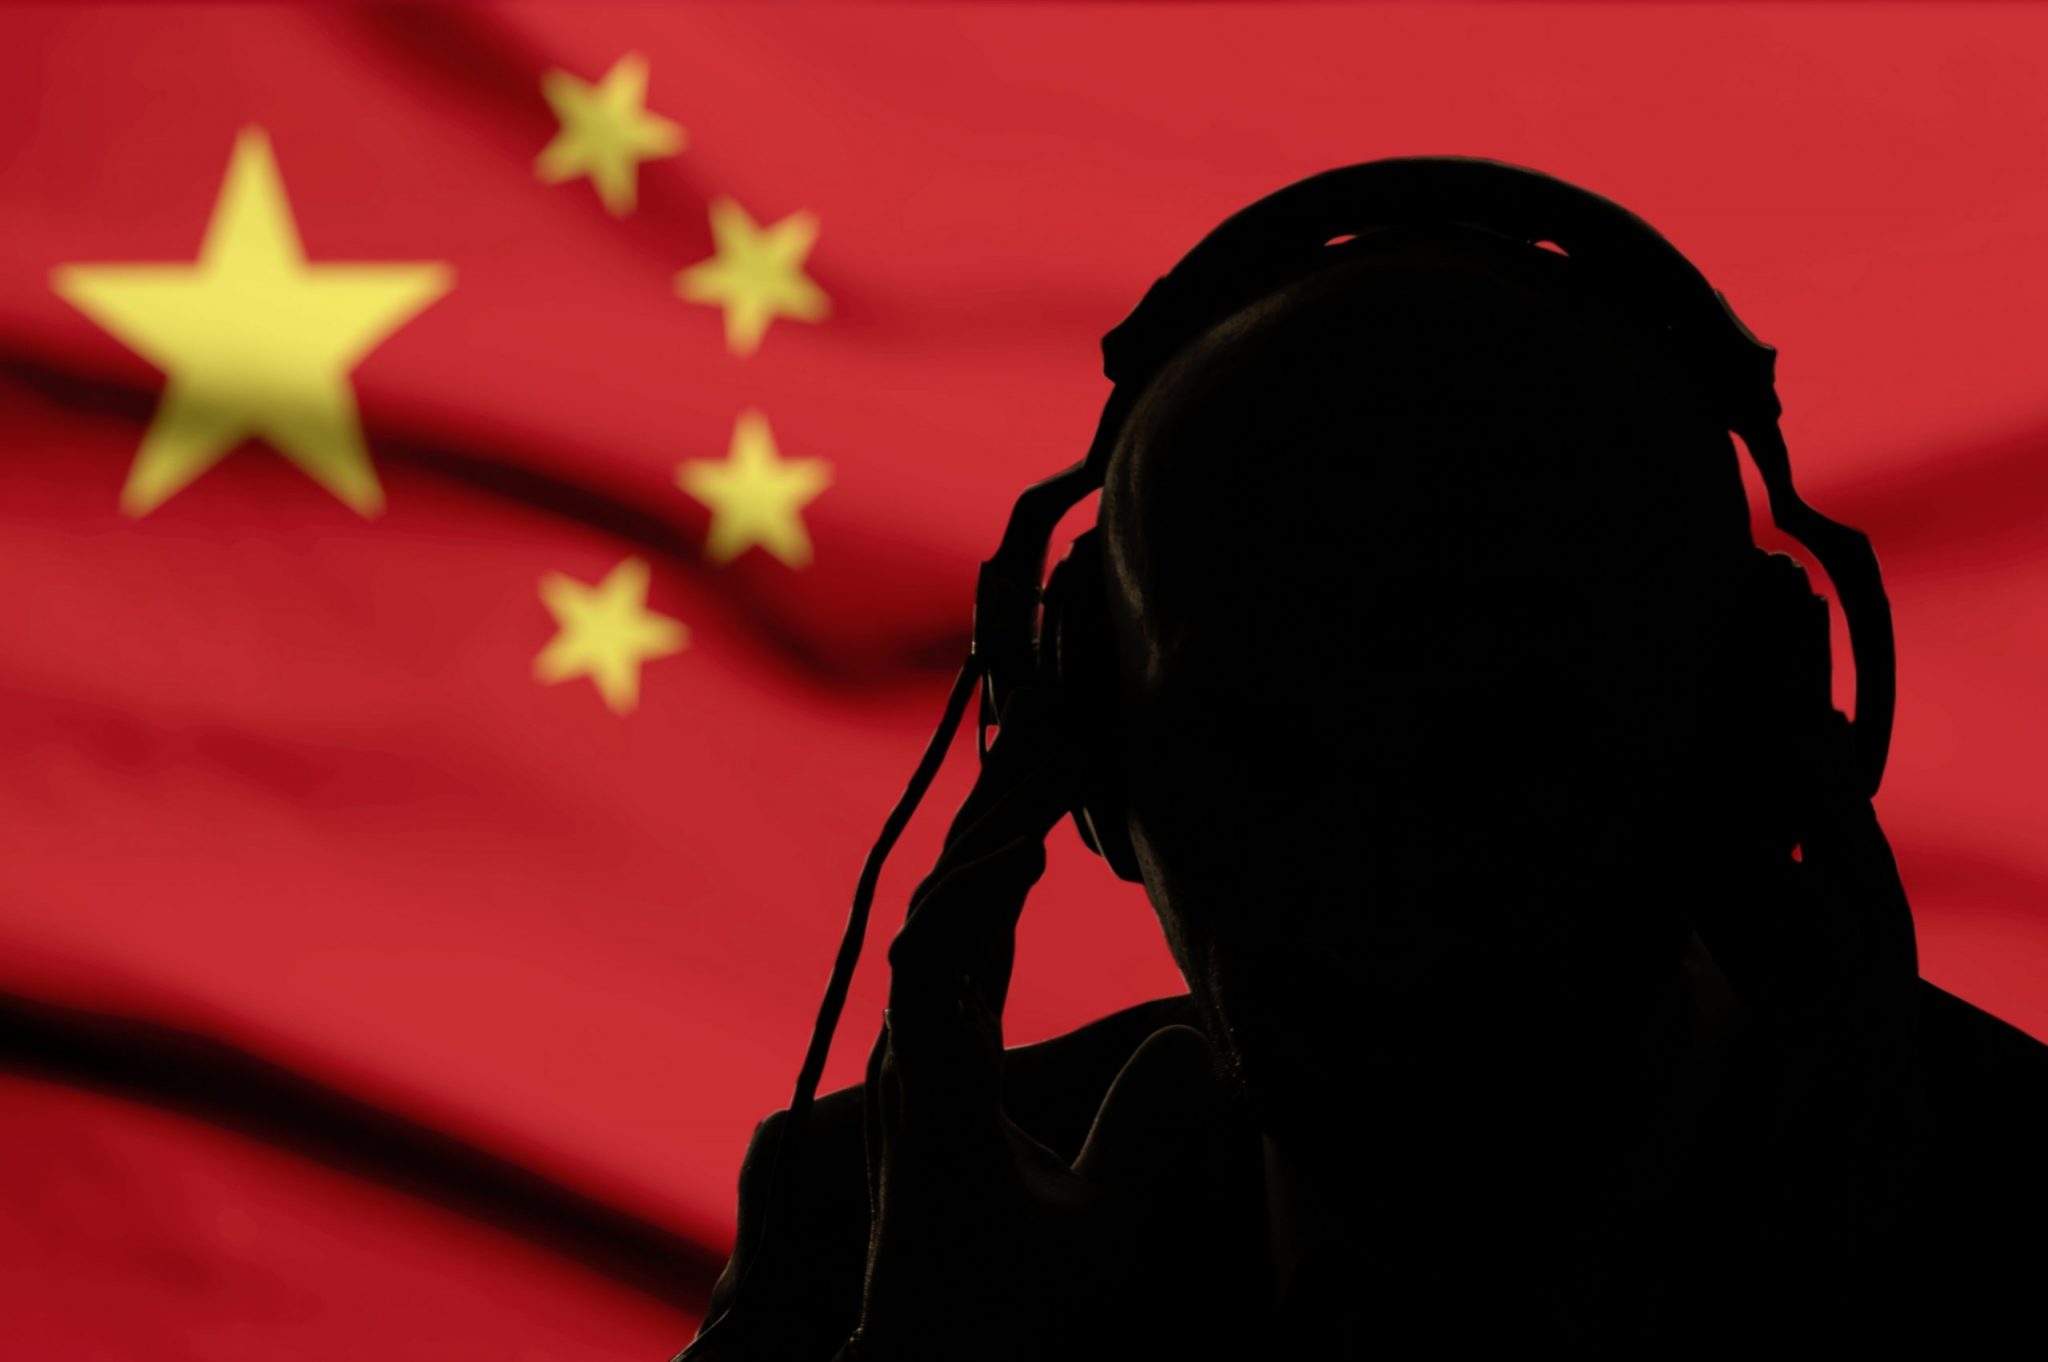 Silhouette of a man in headphones, secret agent eavesdropping, spy and scout, China flag, backlight